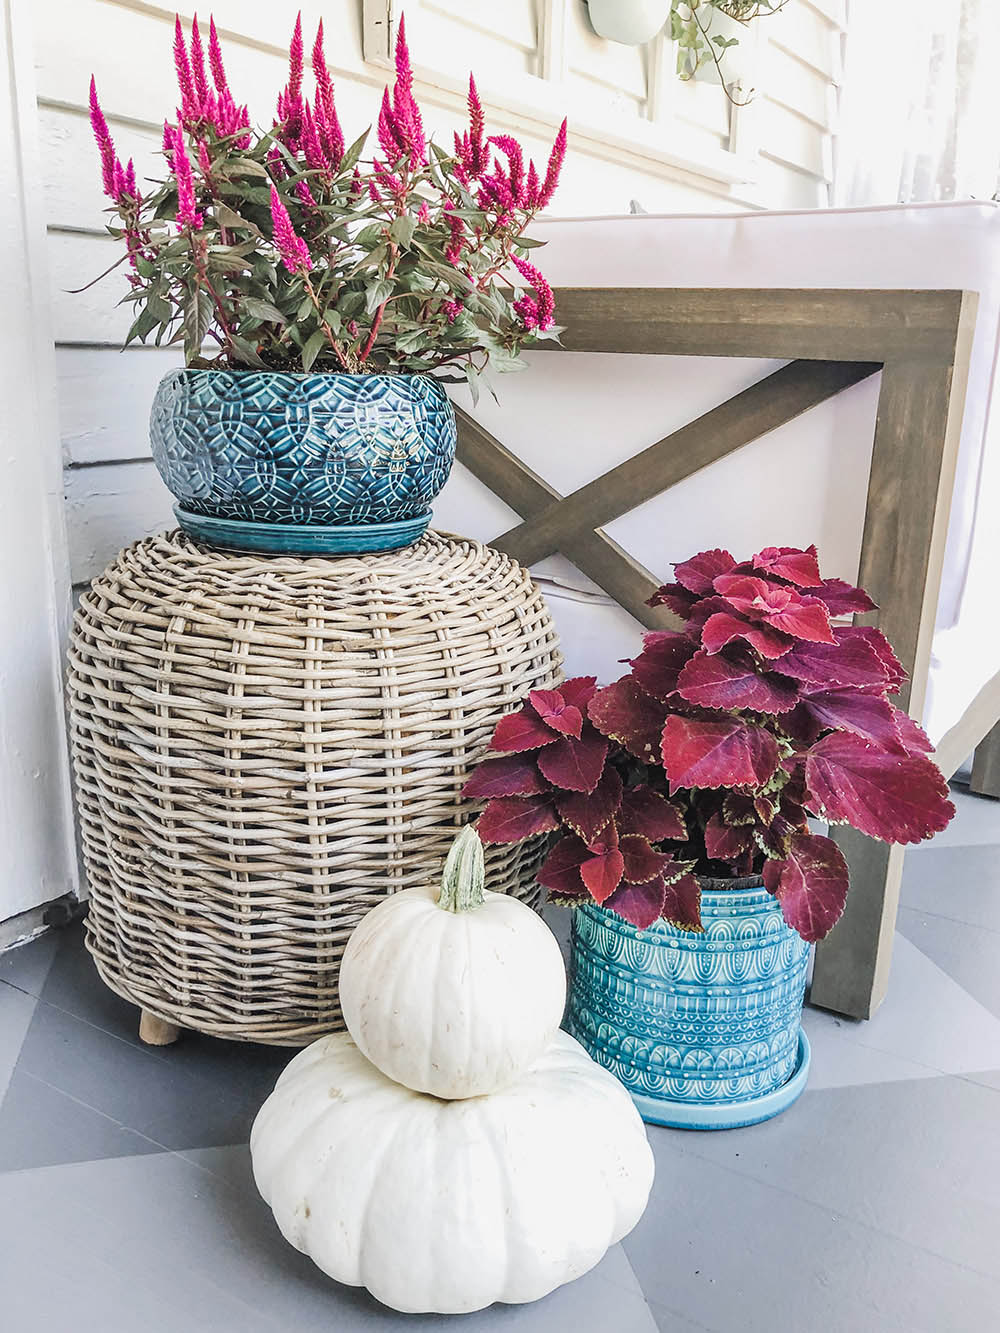 Two blue planters with pink plants next to white stacked pumpkins.